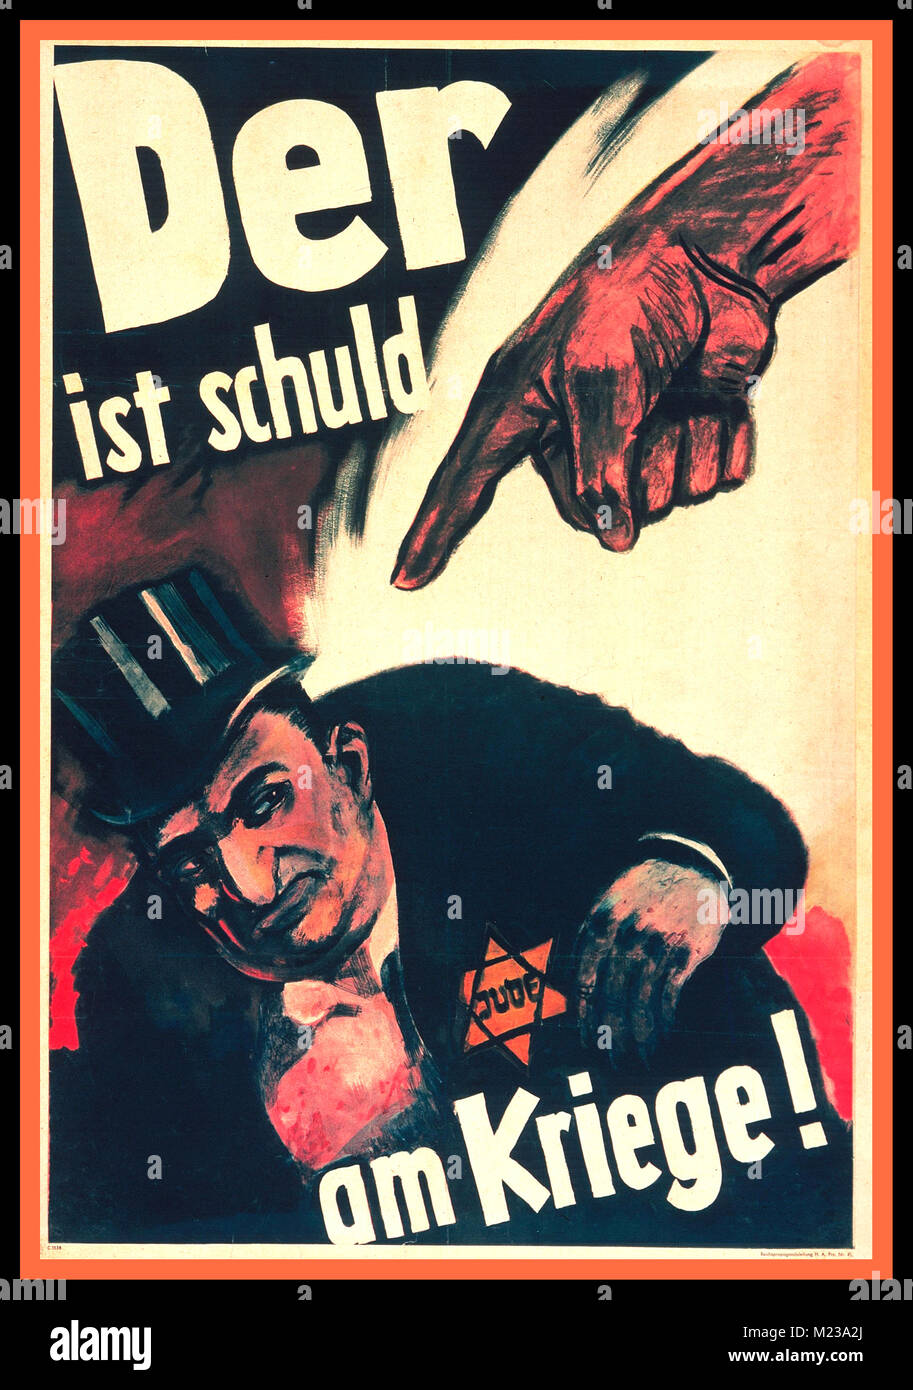 1940’s Nazi Germany anti-Semitic propaganda poster with finger pointing at a Jewish stereotype male banker wearing a Nazi designated Star of David. Anti-semitic racist inflammatory German poster “DER IST SCHULD AM KRIEGE” - The War is his fault ! Stock Photo